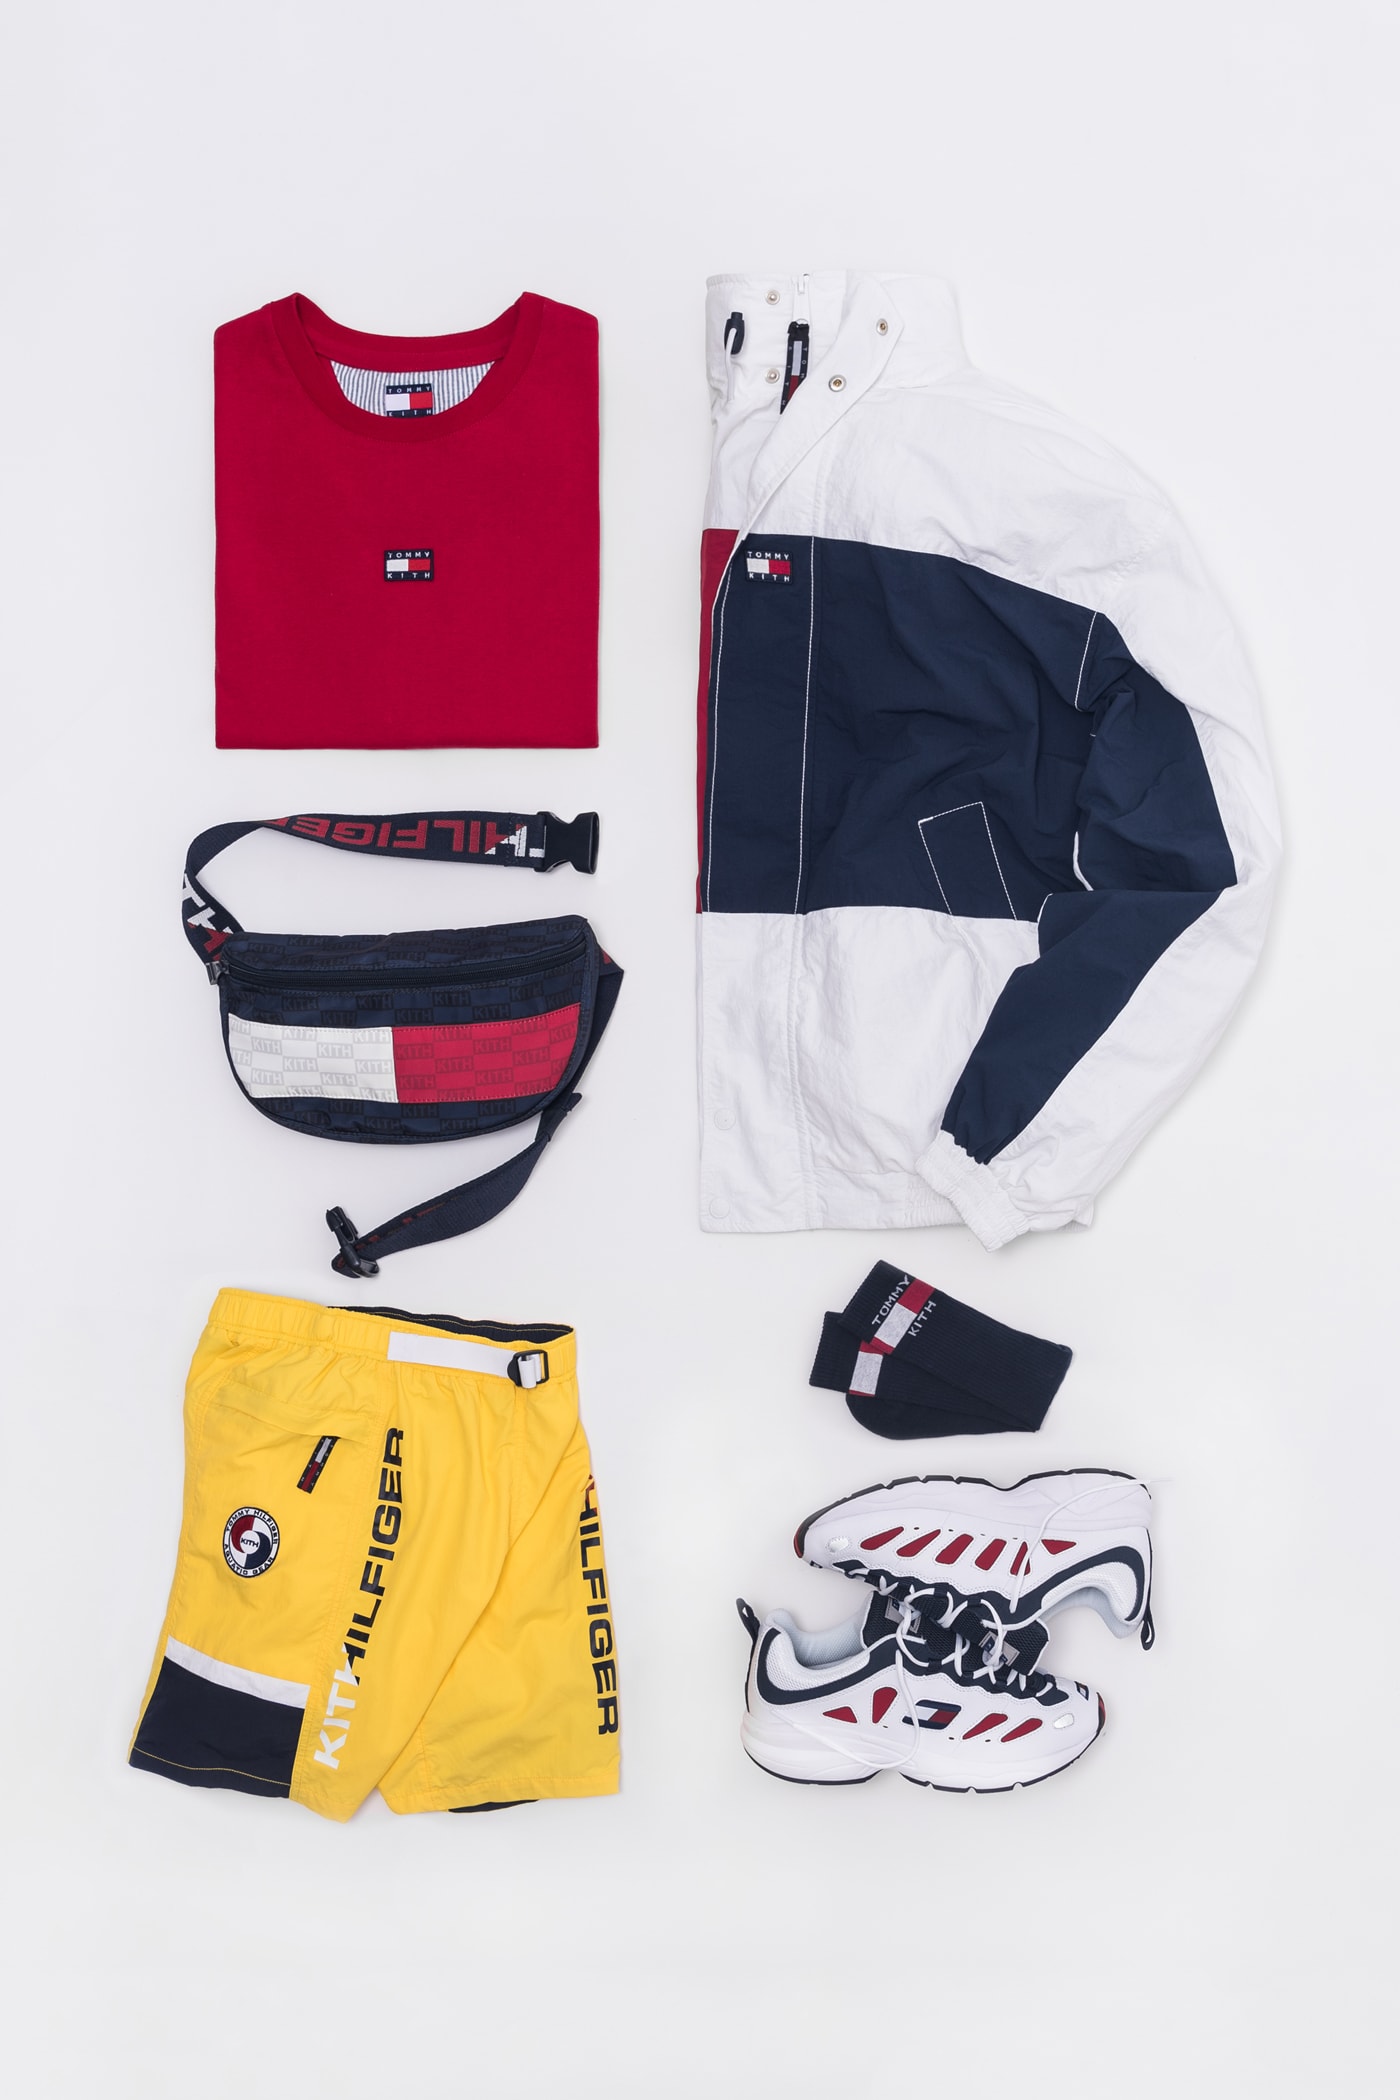 KITH x Tommy Hilifiger Capsule Collection Shirt Red Fanny Pack Blue White Shorts Yellow